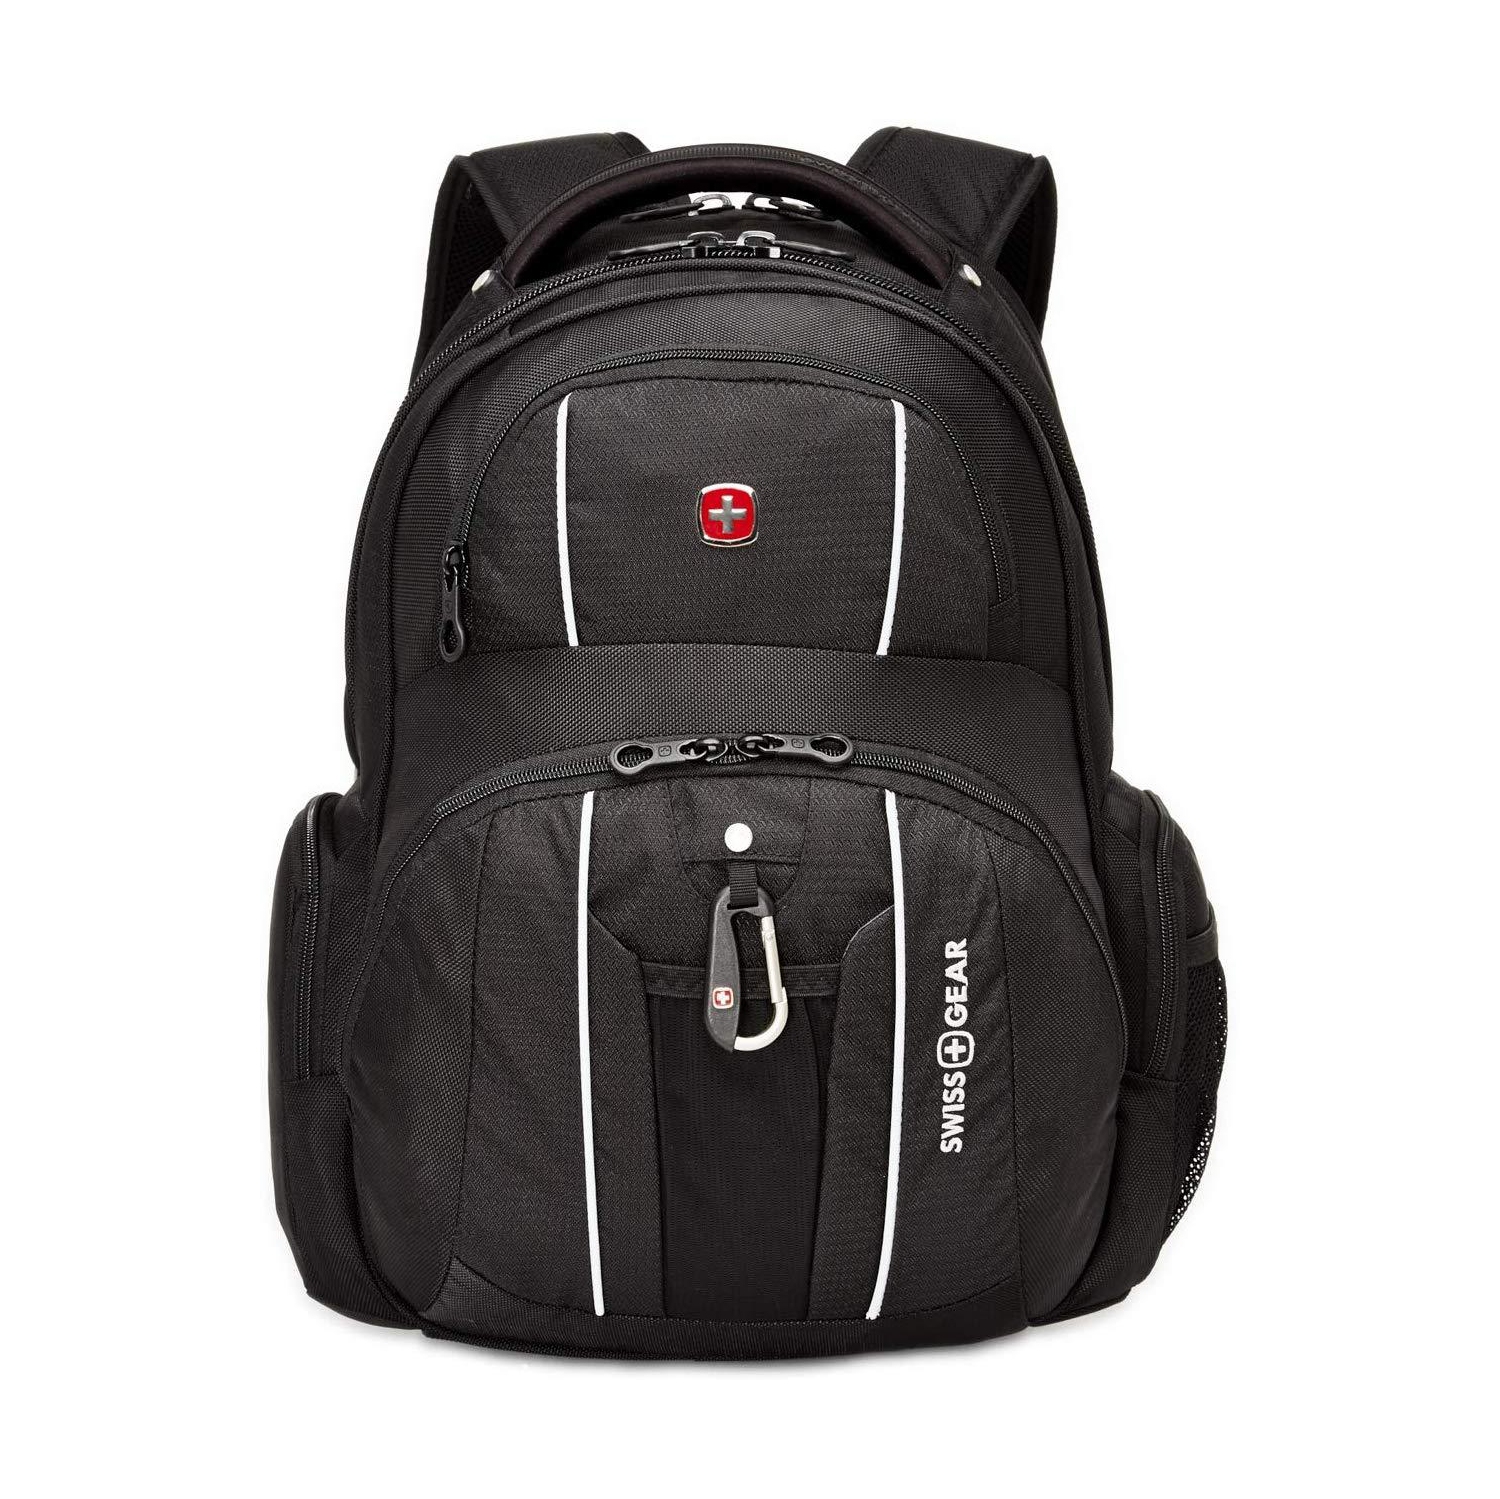 Swiss Gear Under Seat Size Rainproof Backpack for Laptop - Holds Up to...